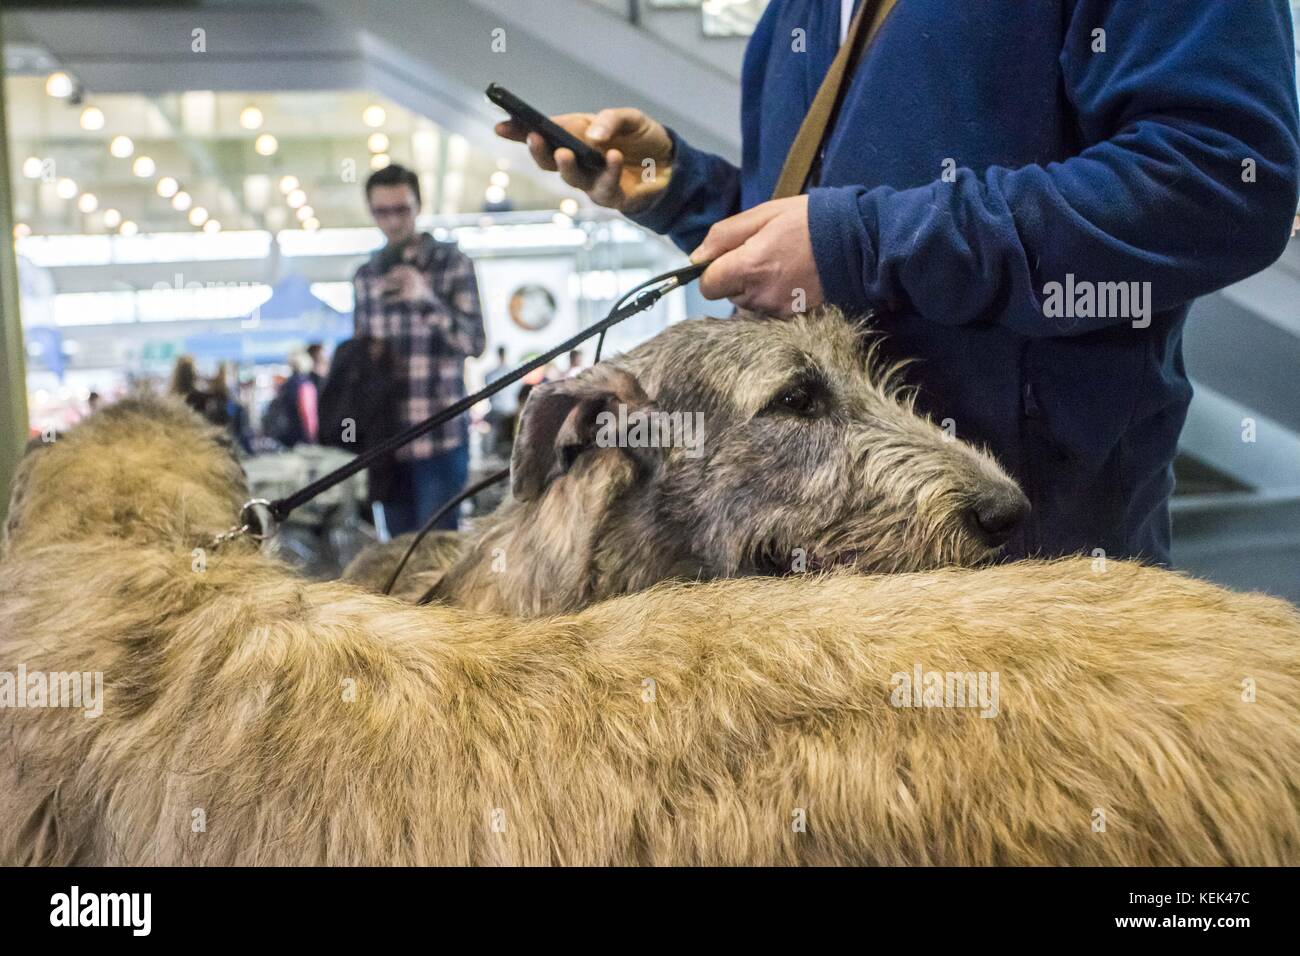 Poznan, Wielkopolska, Poland. 21st Oct, 2017. International Dog Show (CACIB). Qualification for Crufts 2018. There are over 250 breeds of dog beauty from all over the world in one place - at an area of the Poznan International Fair. Credit: Dawid Tatarkiewicz/ZUMA Wire/Alamy Live News Stock Photo